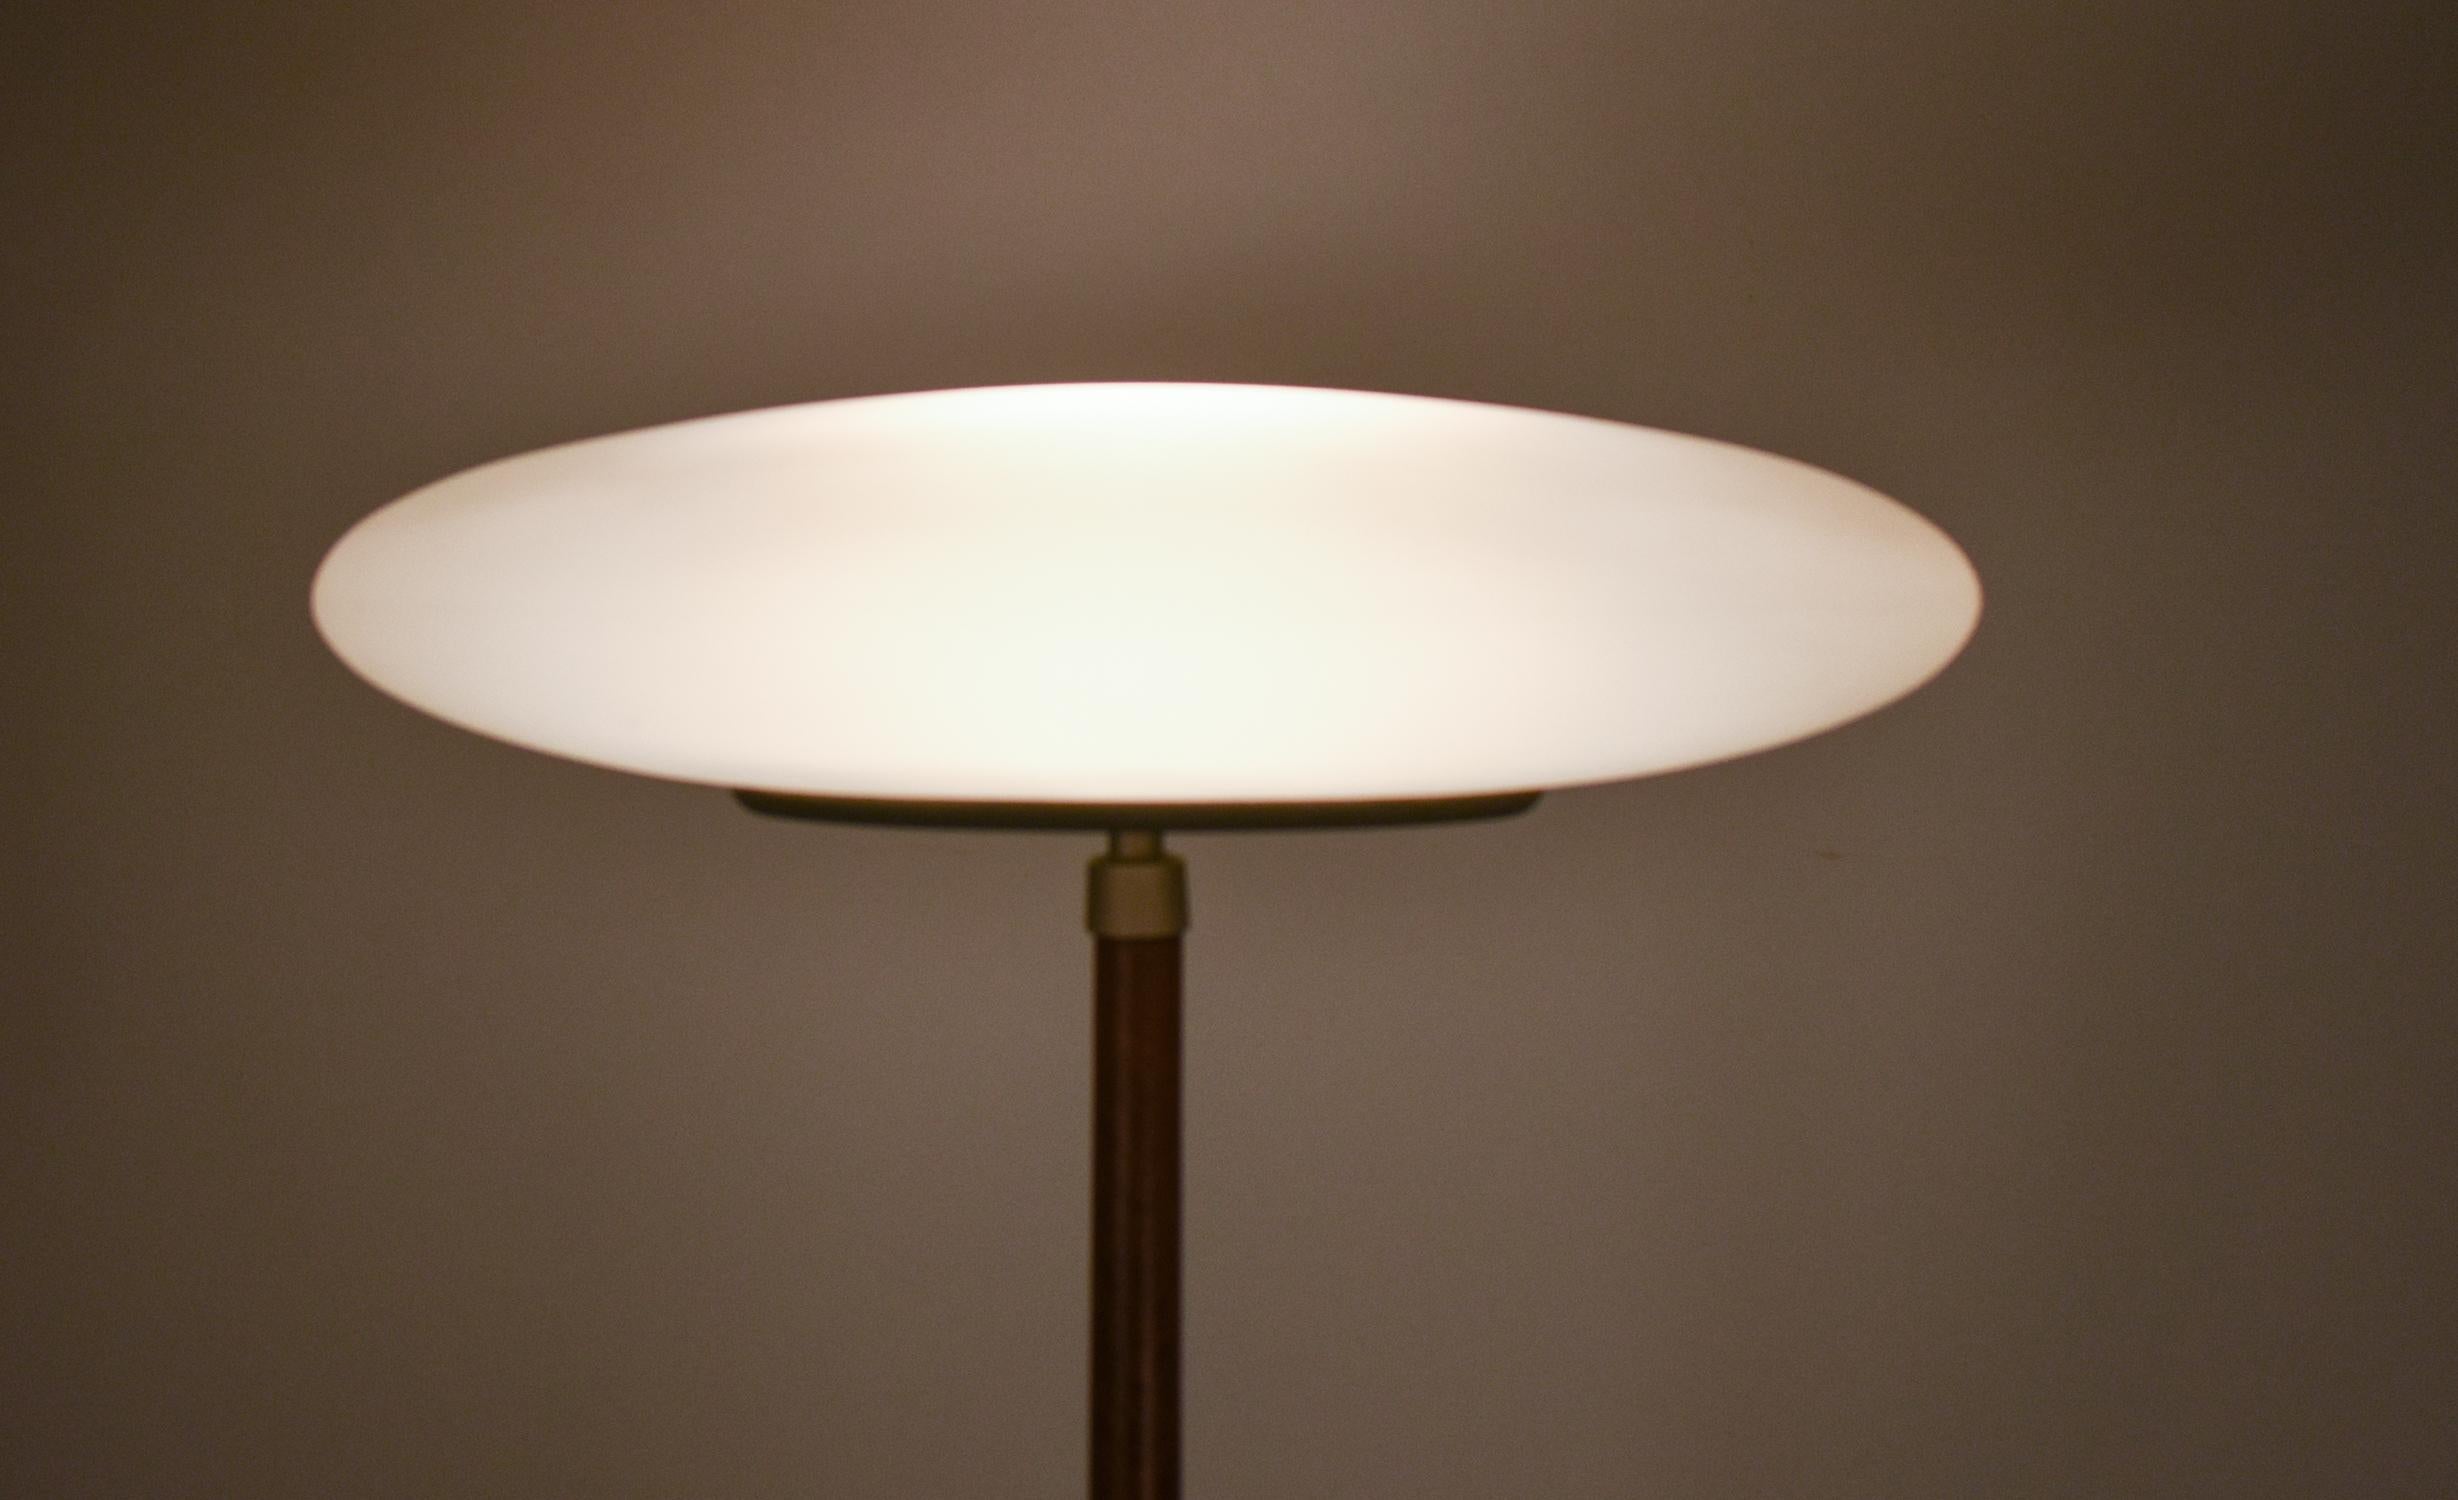 PAO Floor Lamp by Matteo Thun for Arteluce, Italy 1990's For Sale 1